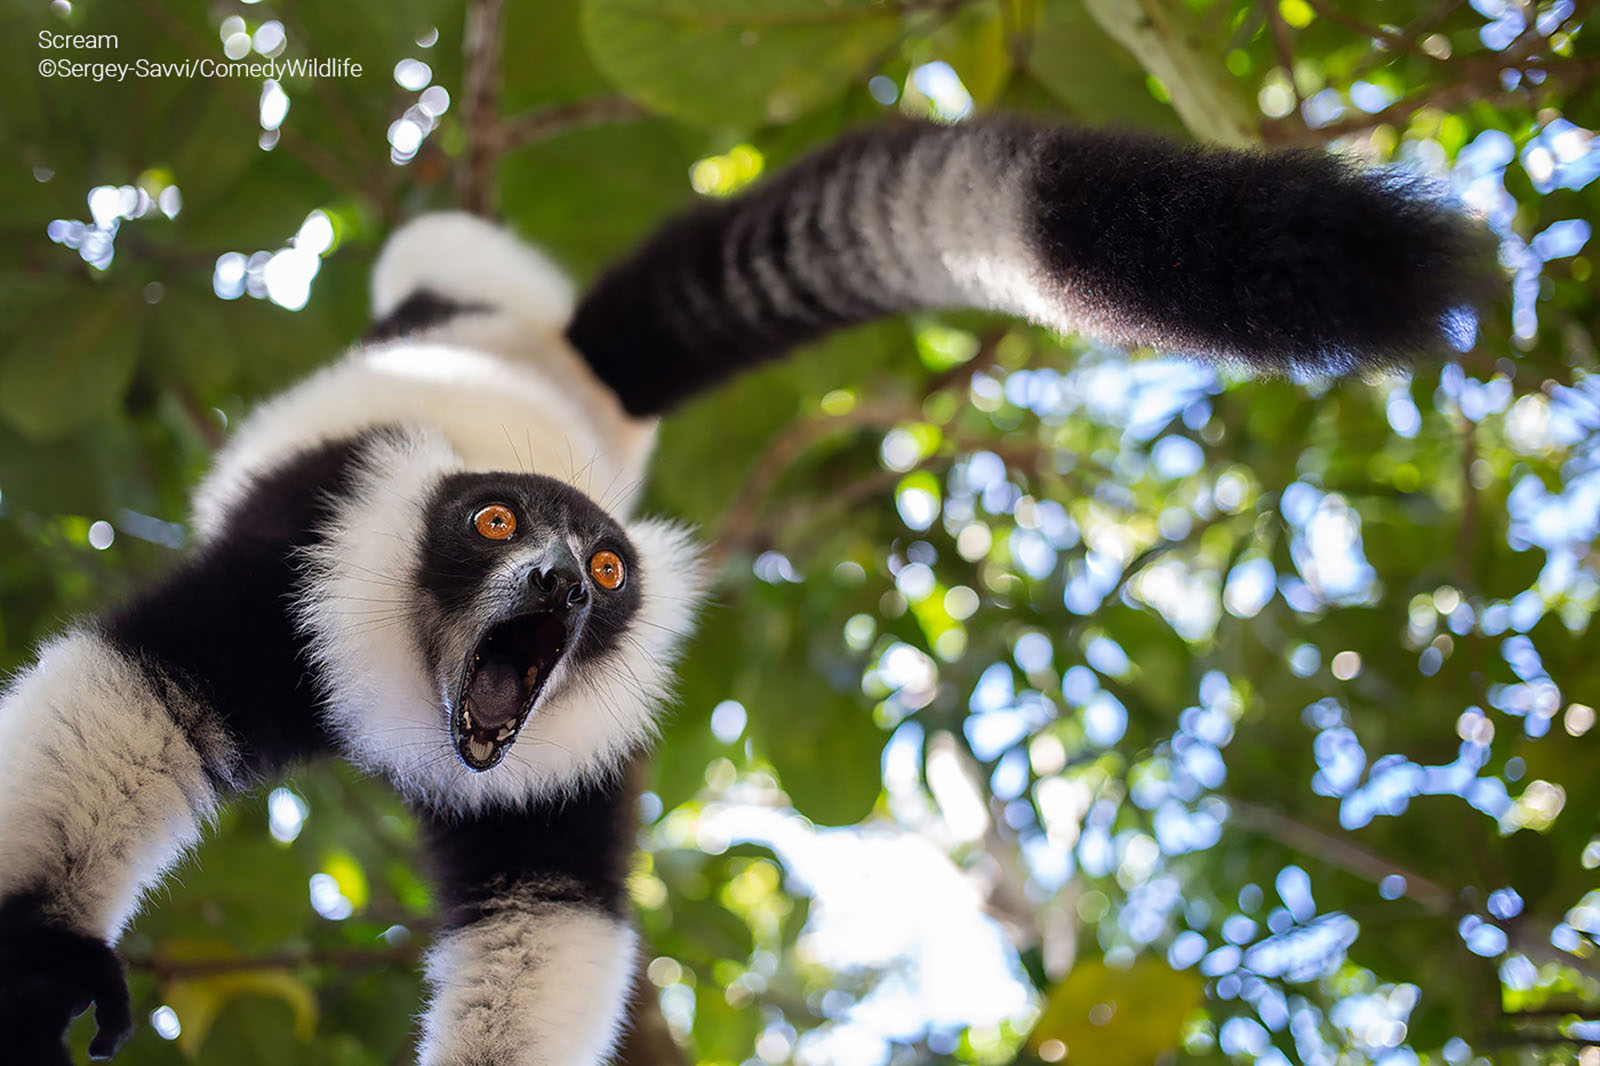 A lemur photographed from below, looking like it's screaming.